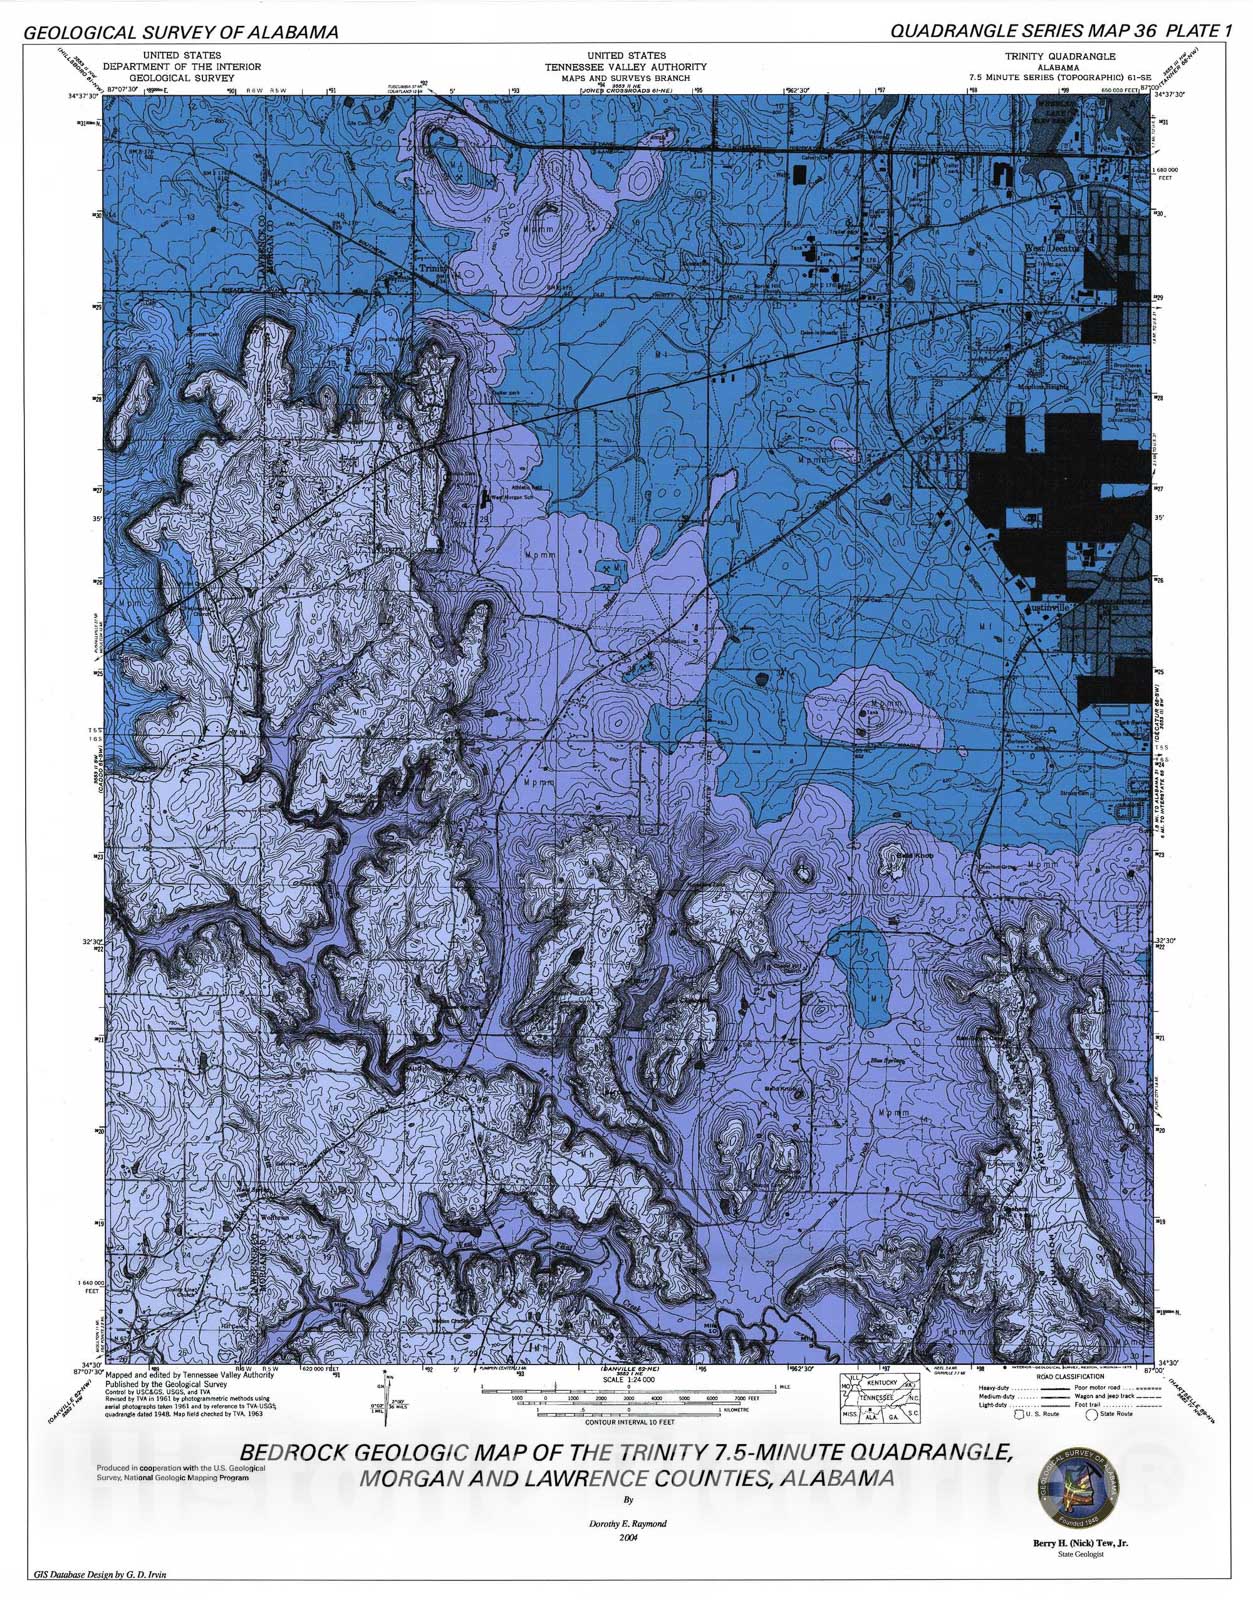 Map : Geology of the Trinity 7.5-minute quadrangle, Morgan and Lawrence Counties, Alabama, 2004 Cartography Wall Art :